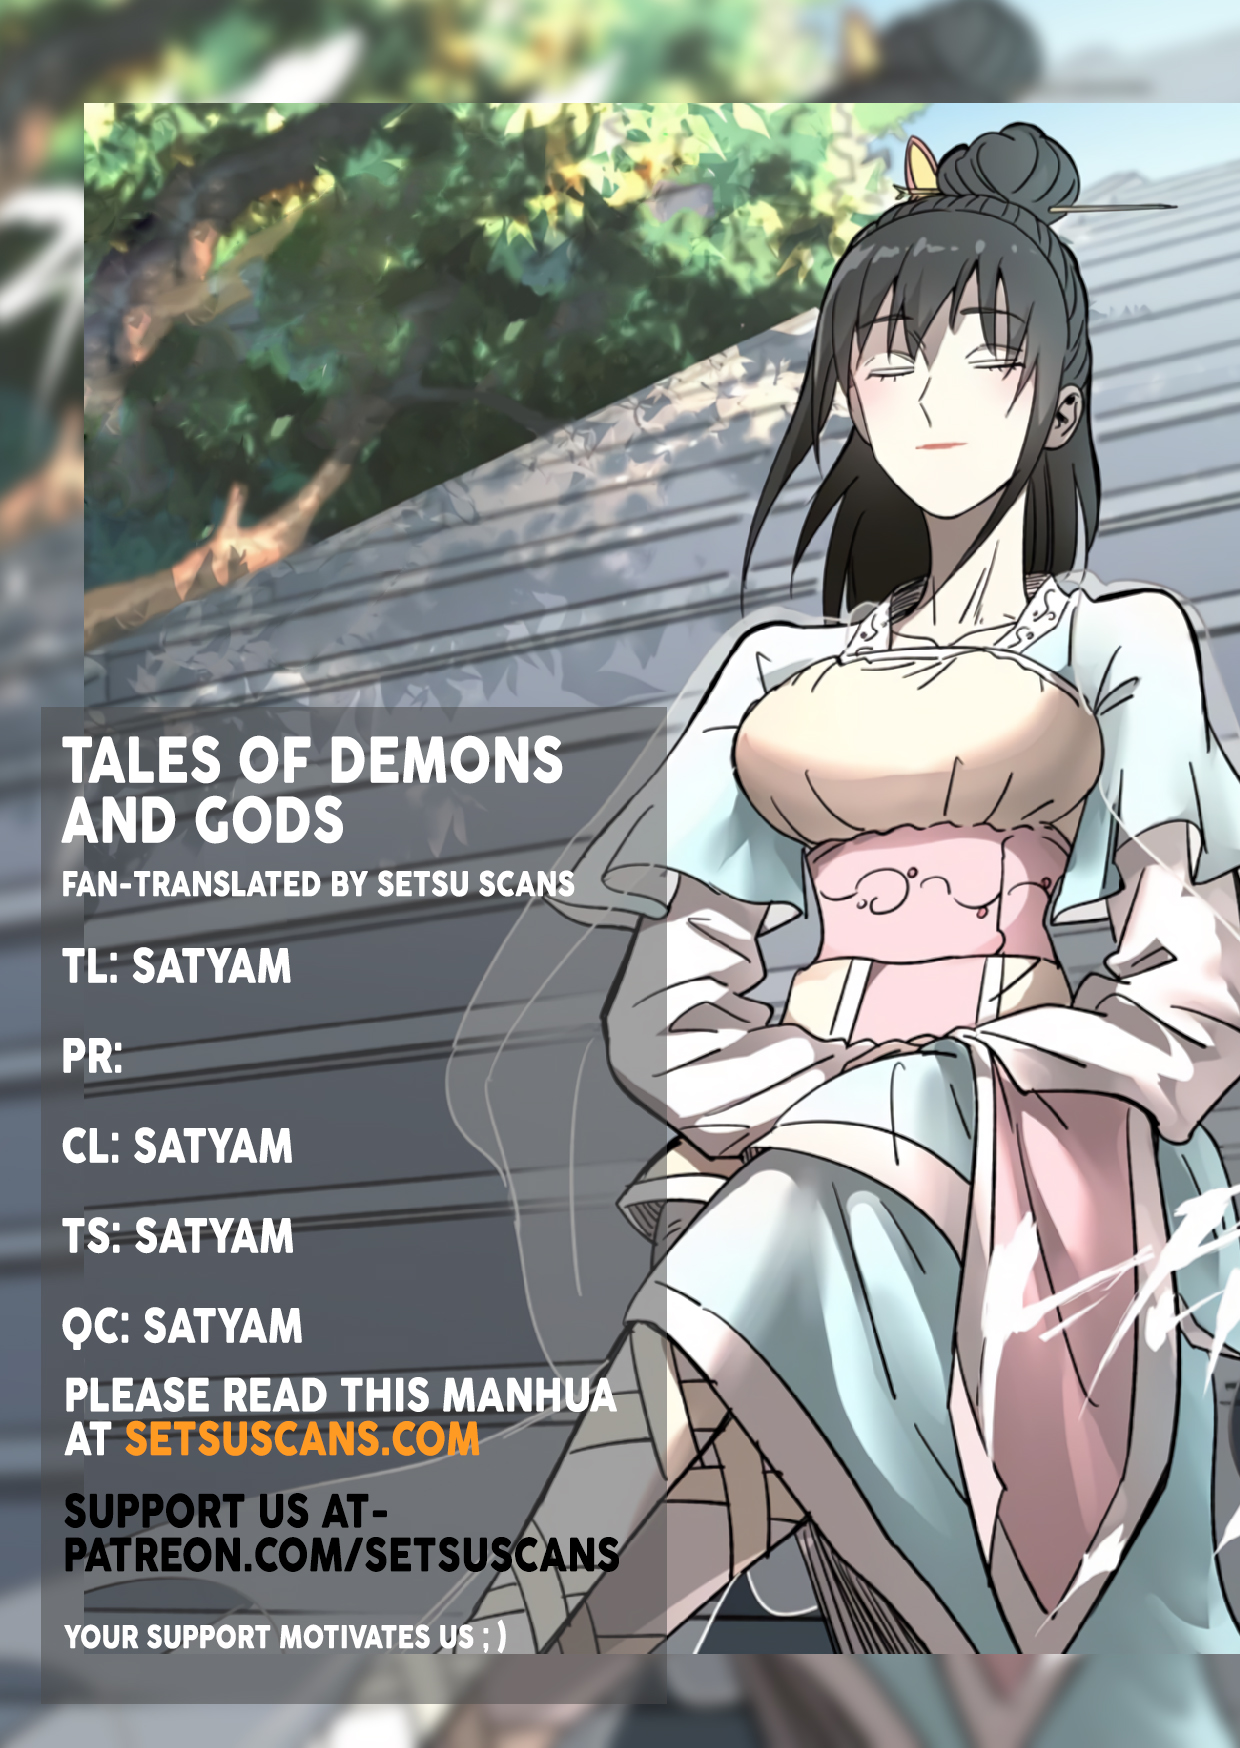 Tales of Demons and Gods - Chapter 26103 - Demon God’s Sect (1) - Image 1